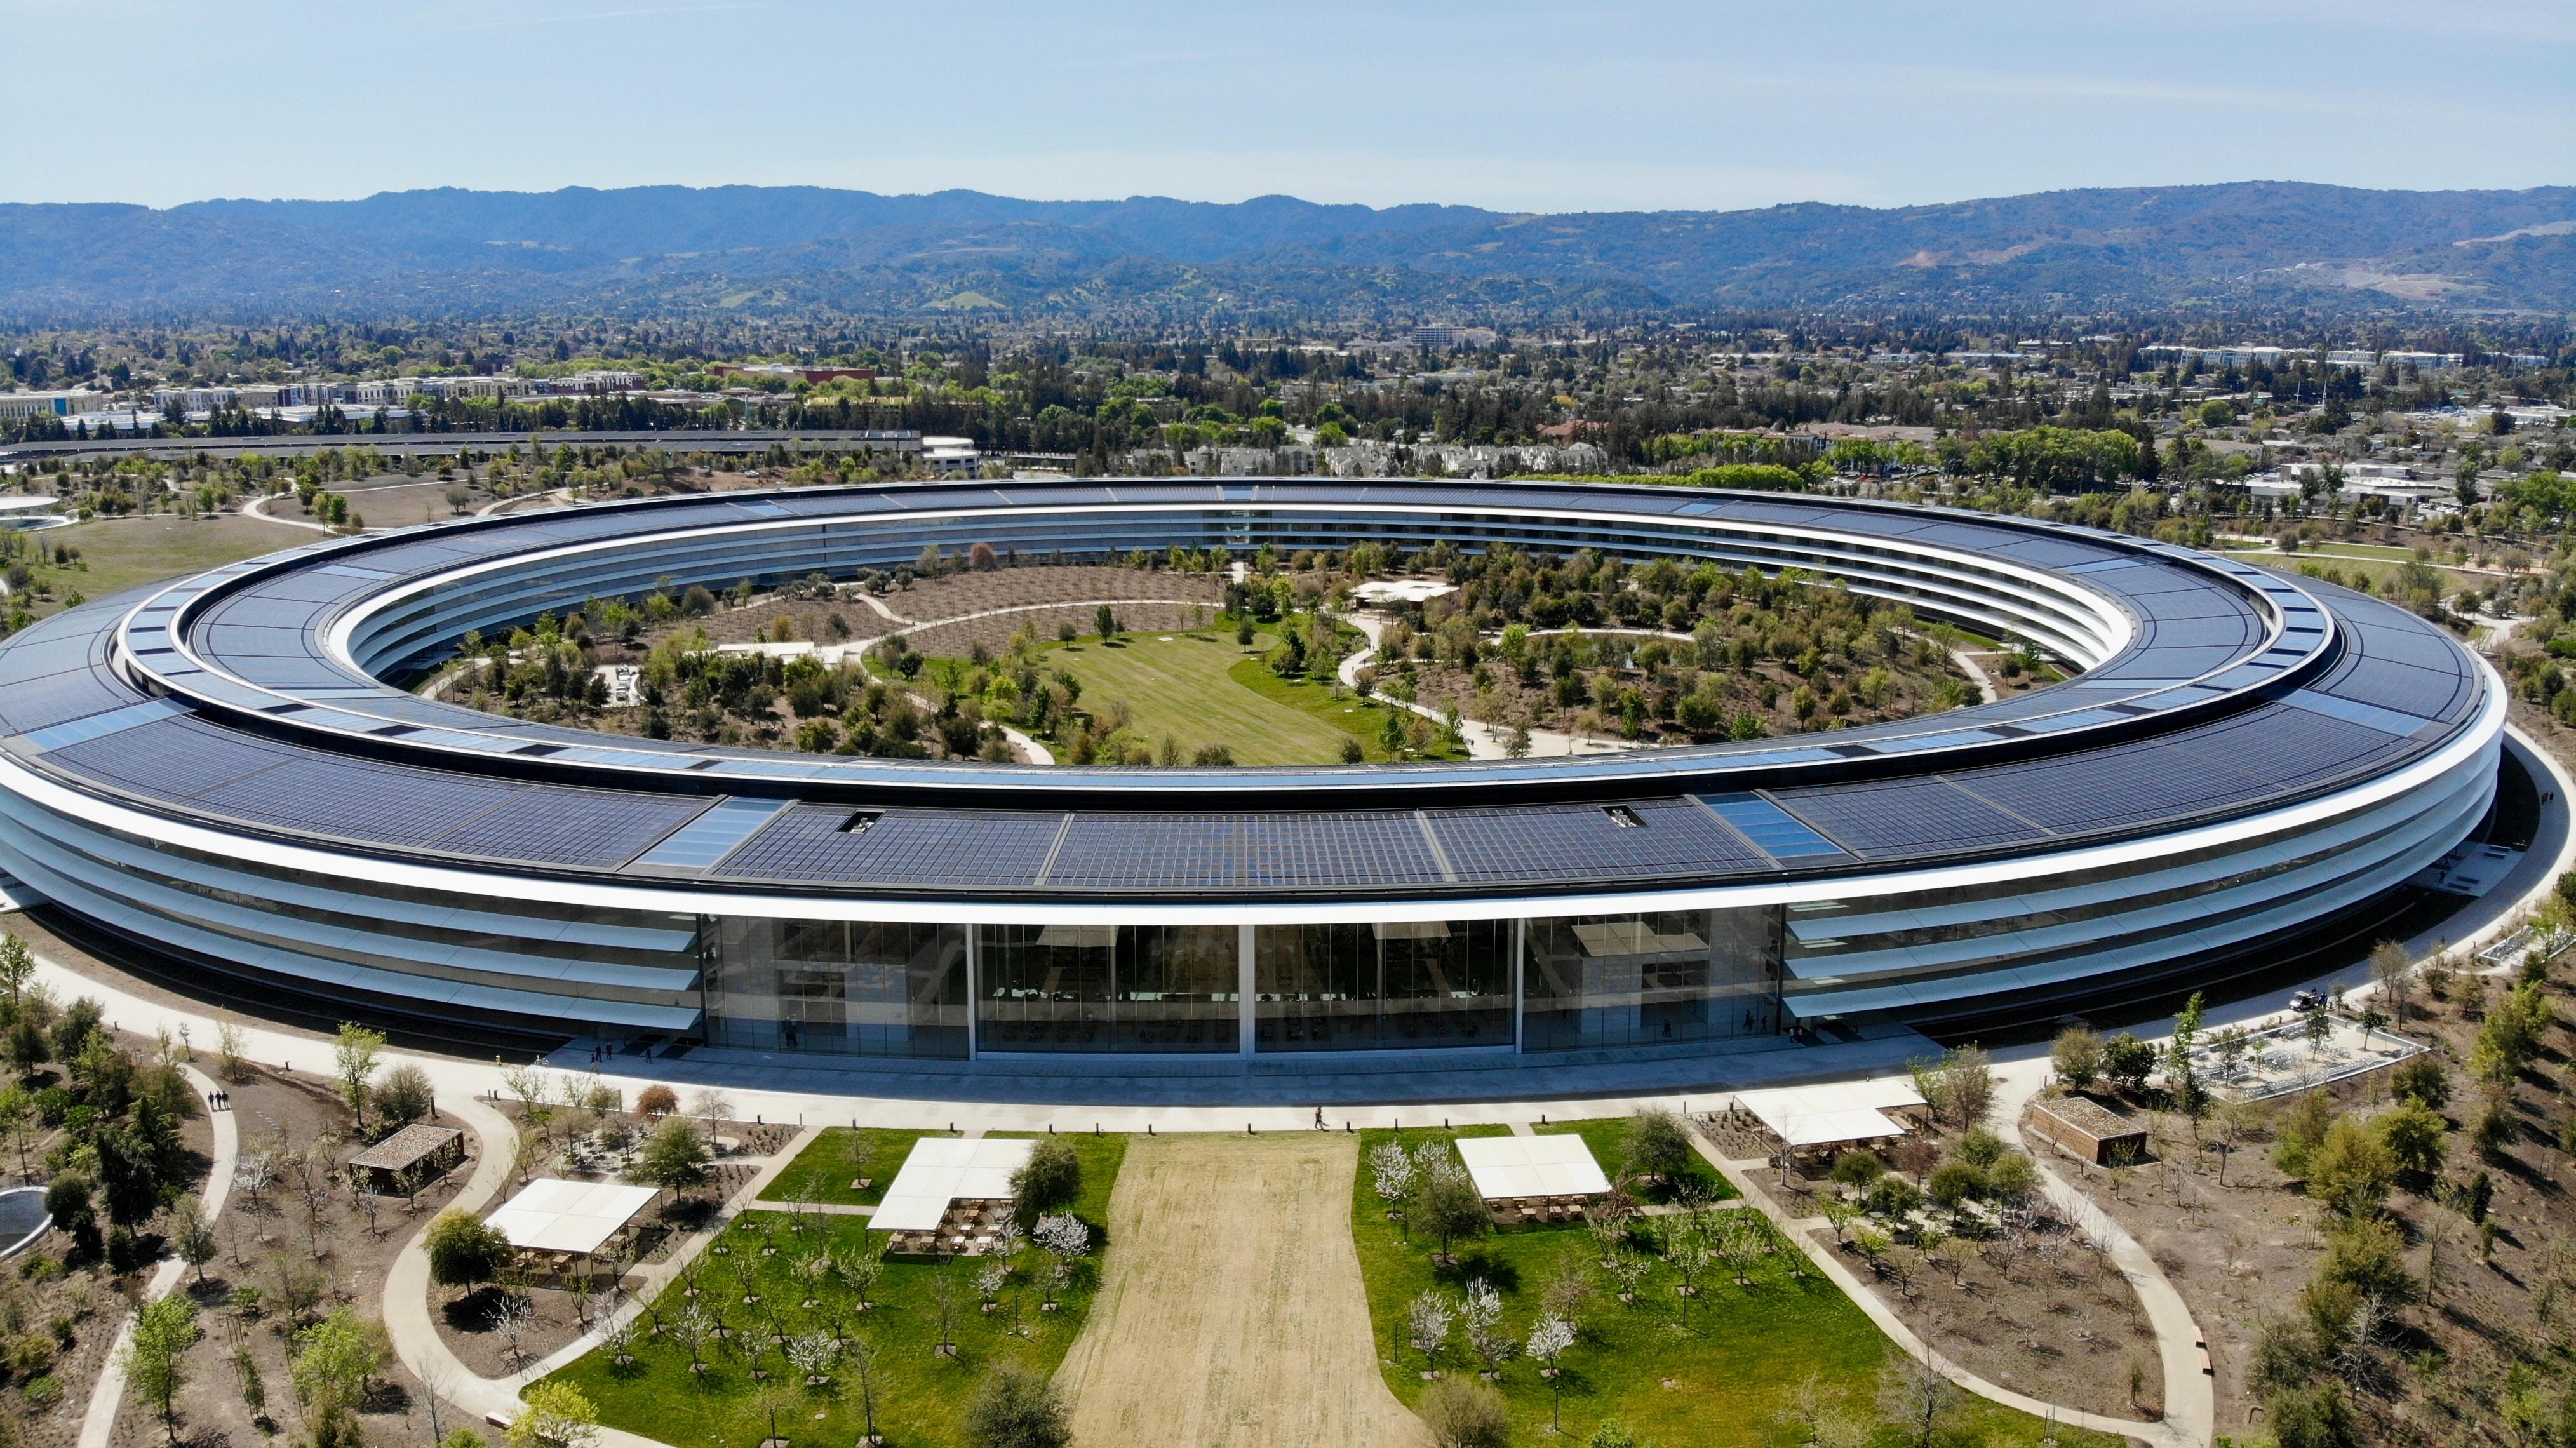 Apple Park Picture. Download Free Image